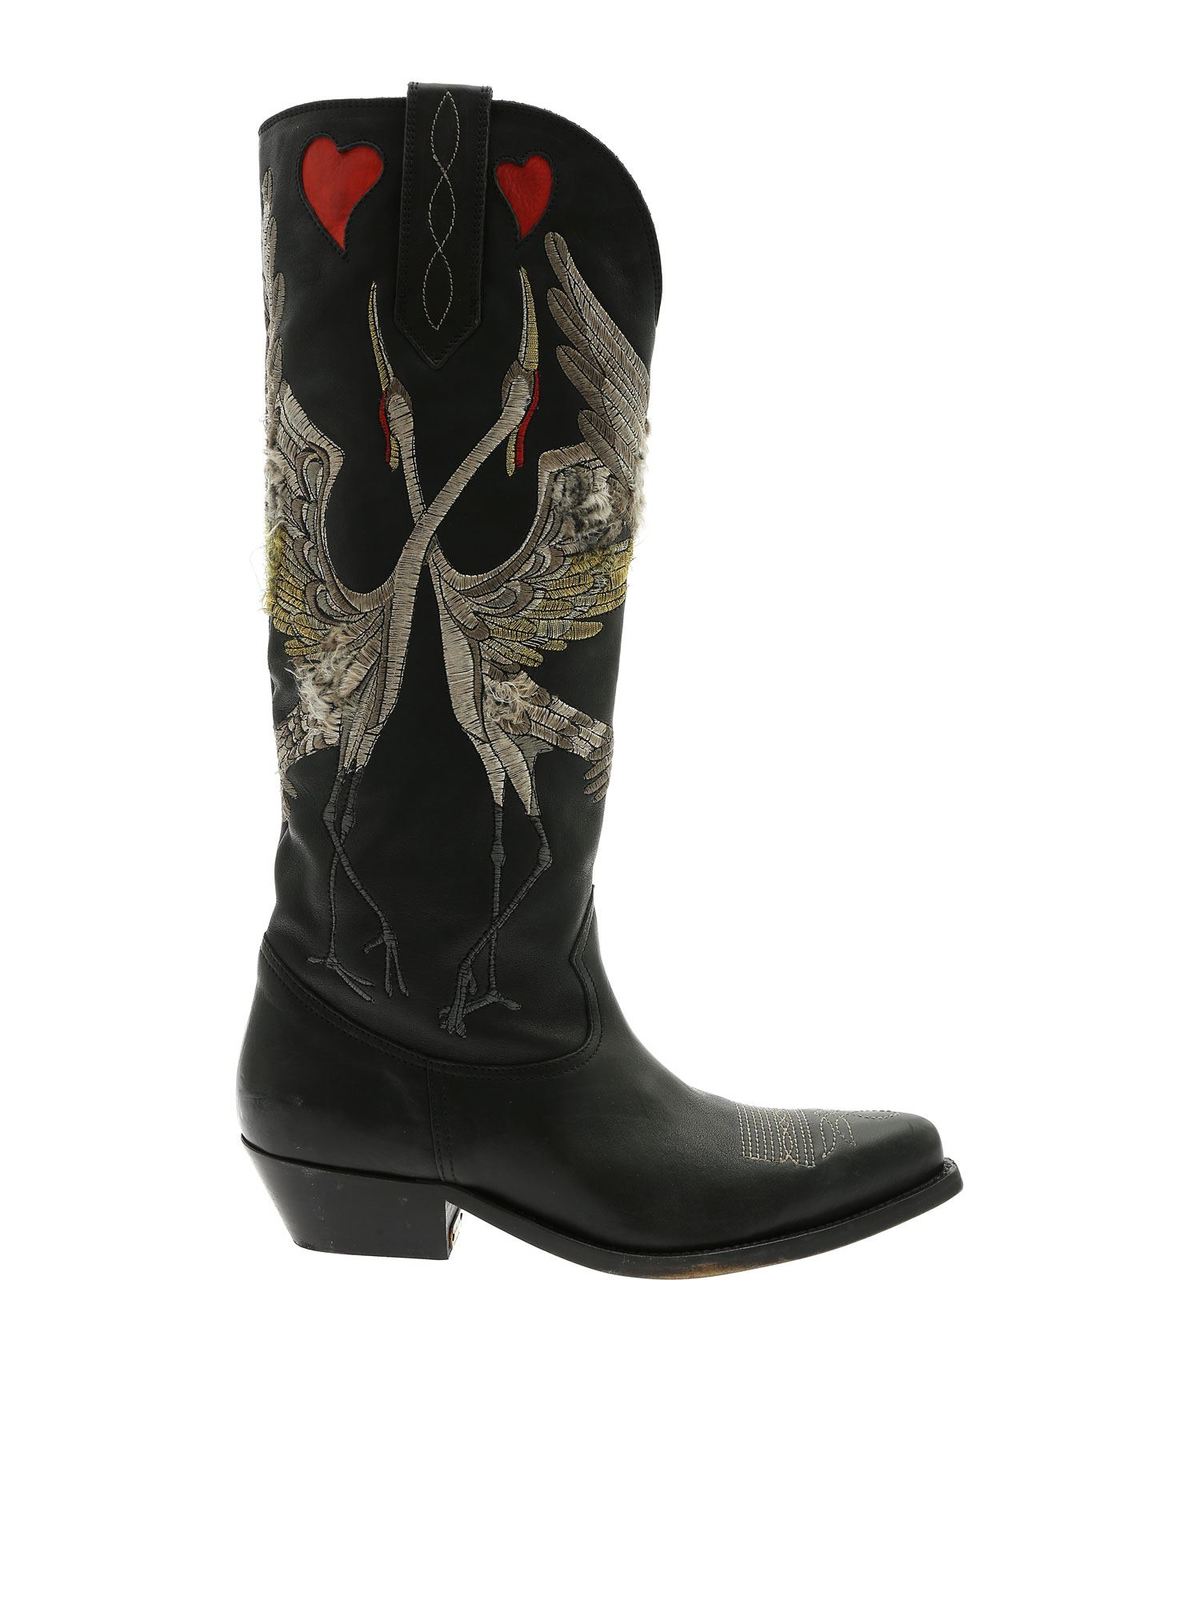 Golden Goose - Wish Star texan boots in black - boots - G35WS930B3